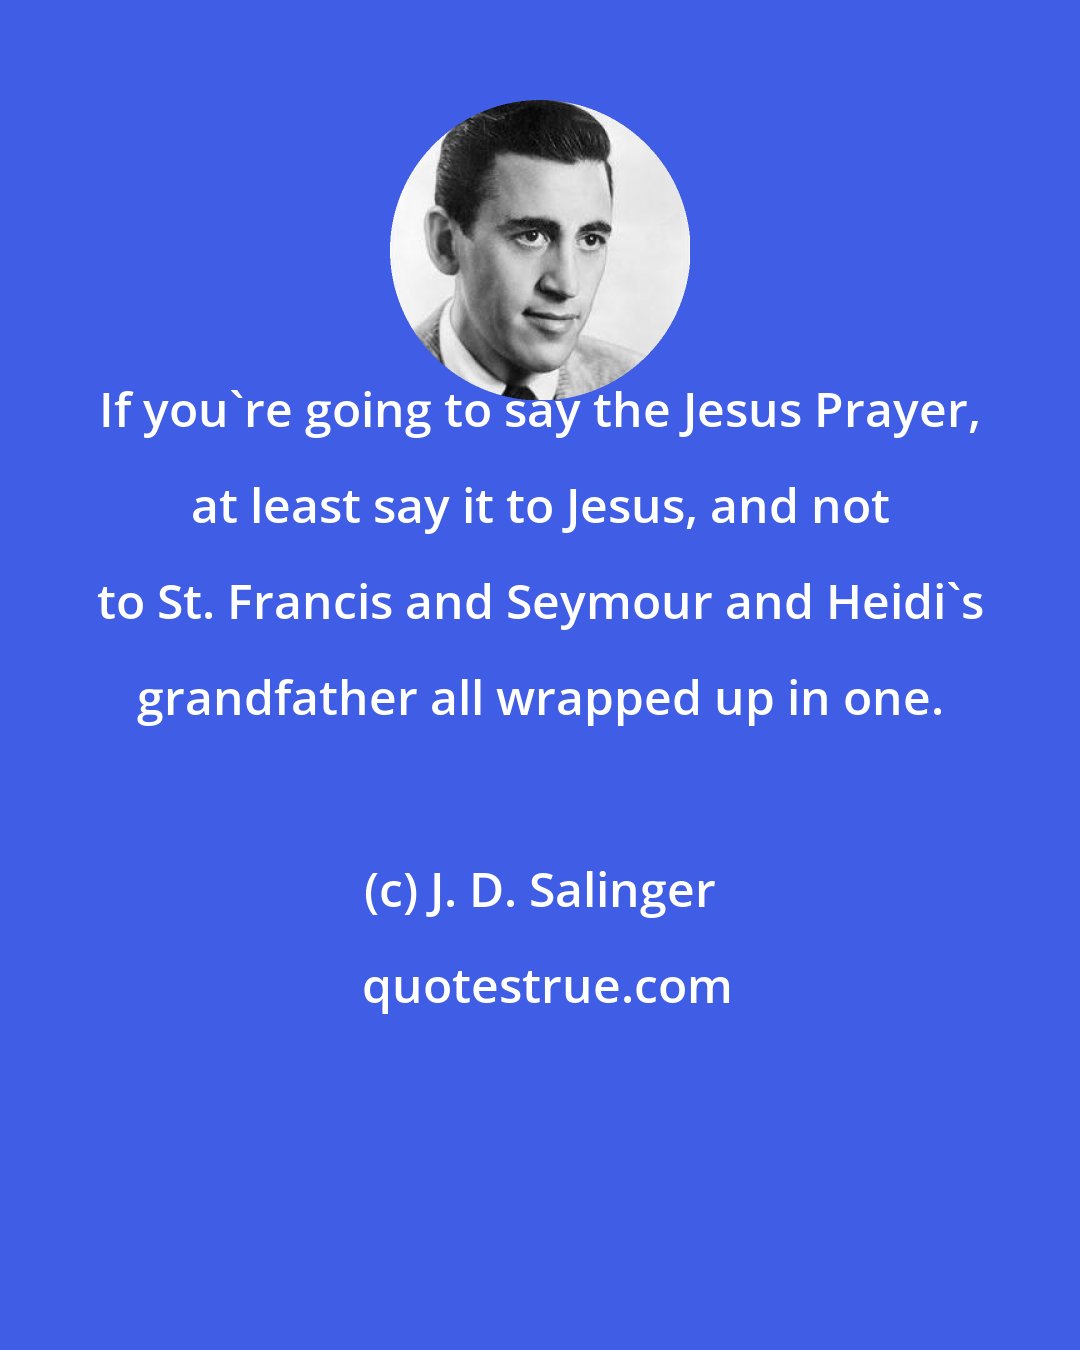 J. D. Salinger: If you're going to say the Jesus Prayer, at least say it to Jesus, and not to St. Francis and Seymour and Heidi's grandfather all wrapped up in one.